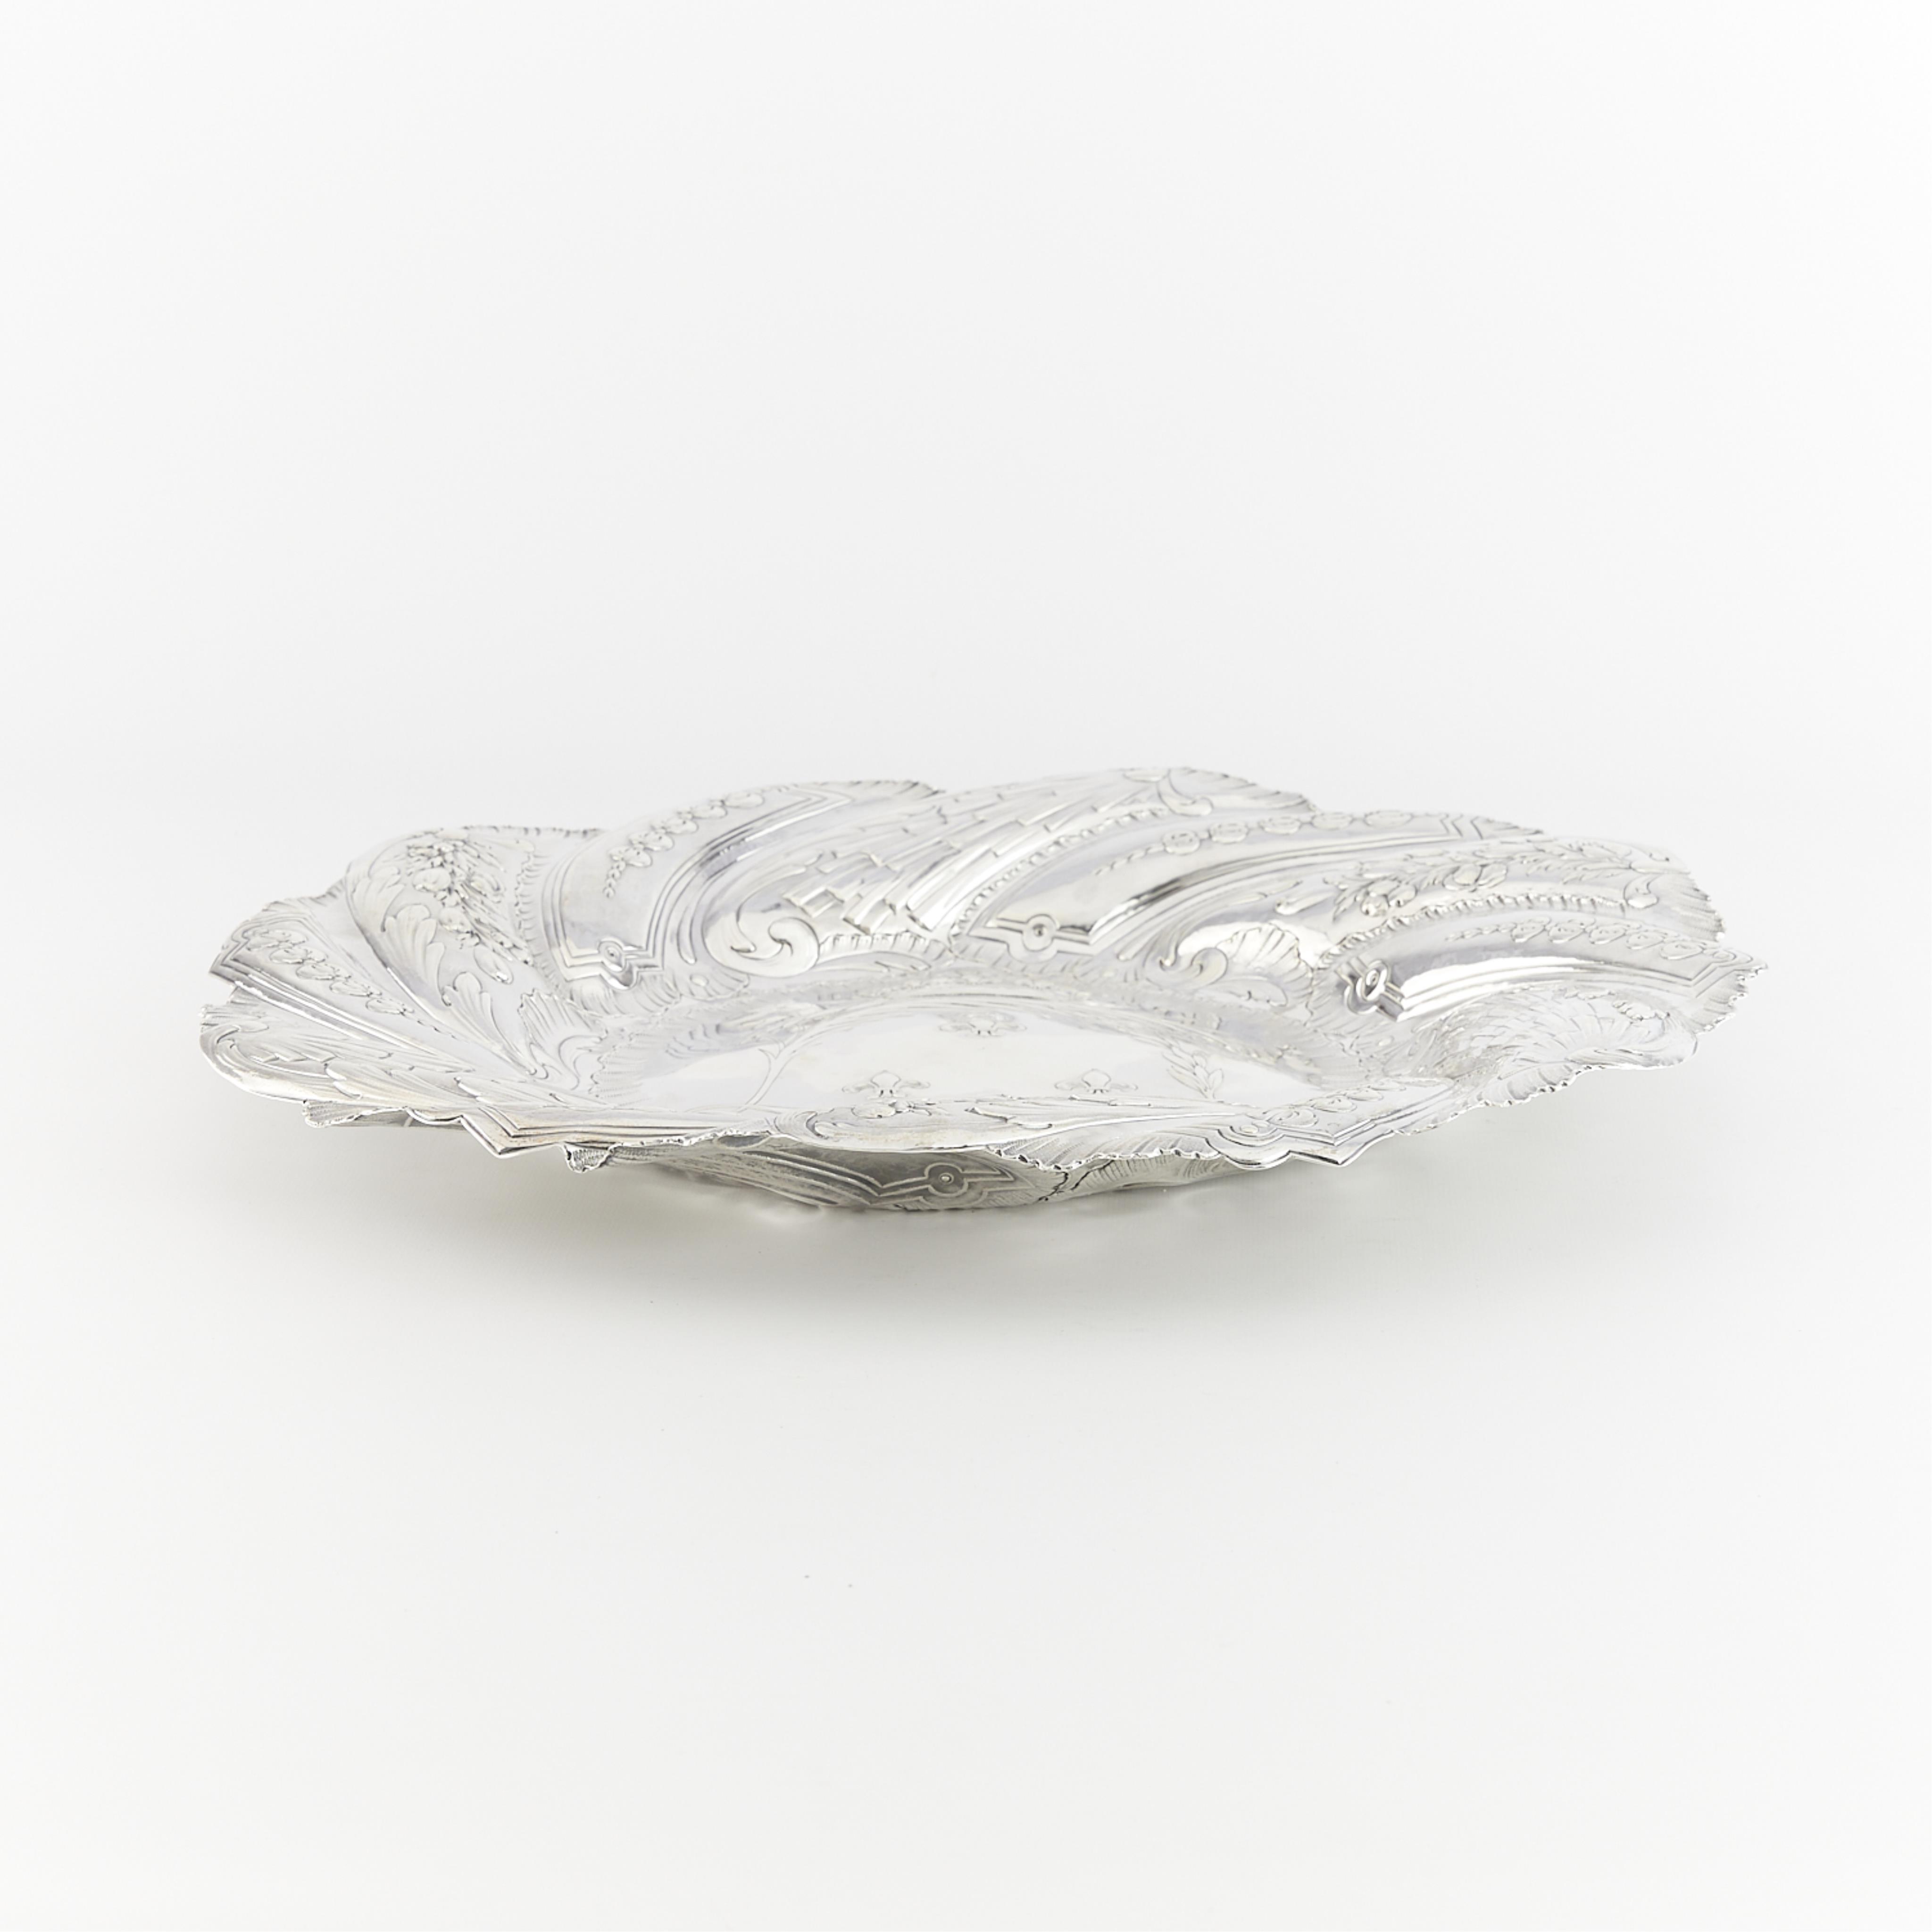 French Sterling Silver Platter 30.8 ozt - Image 2 of 5